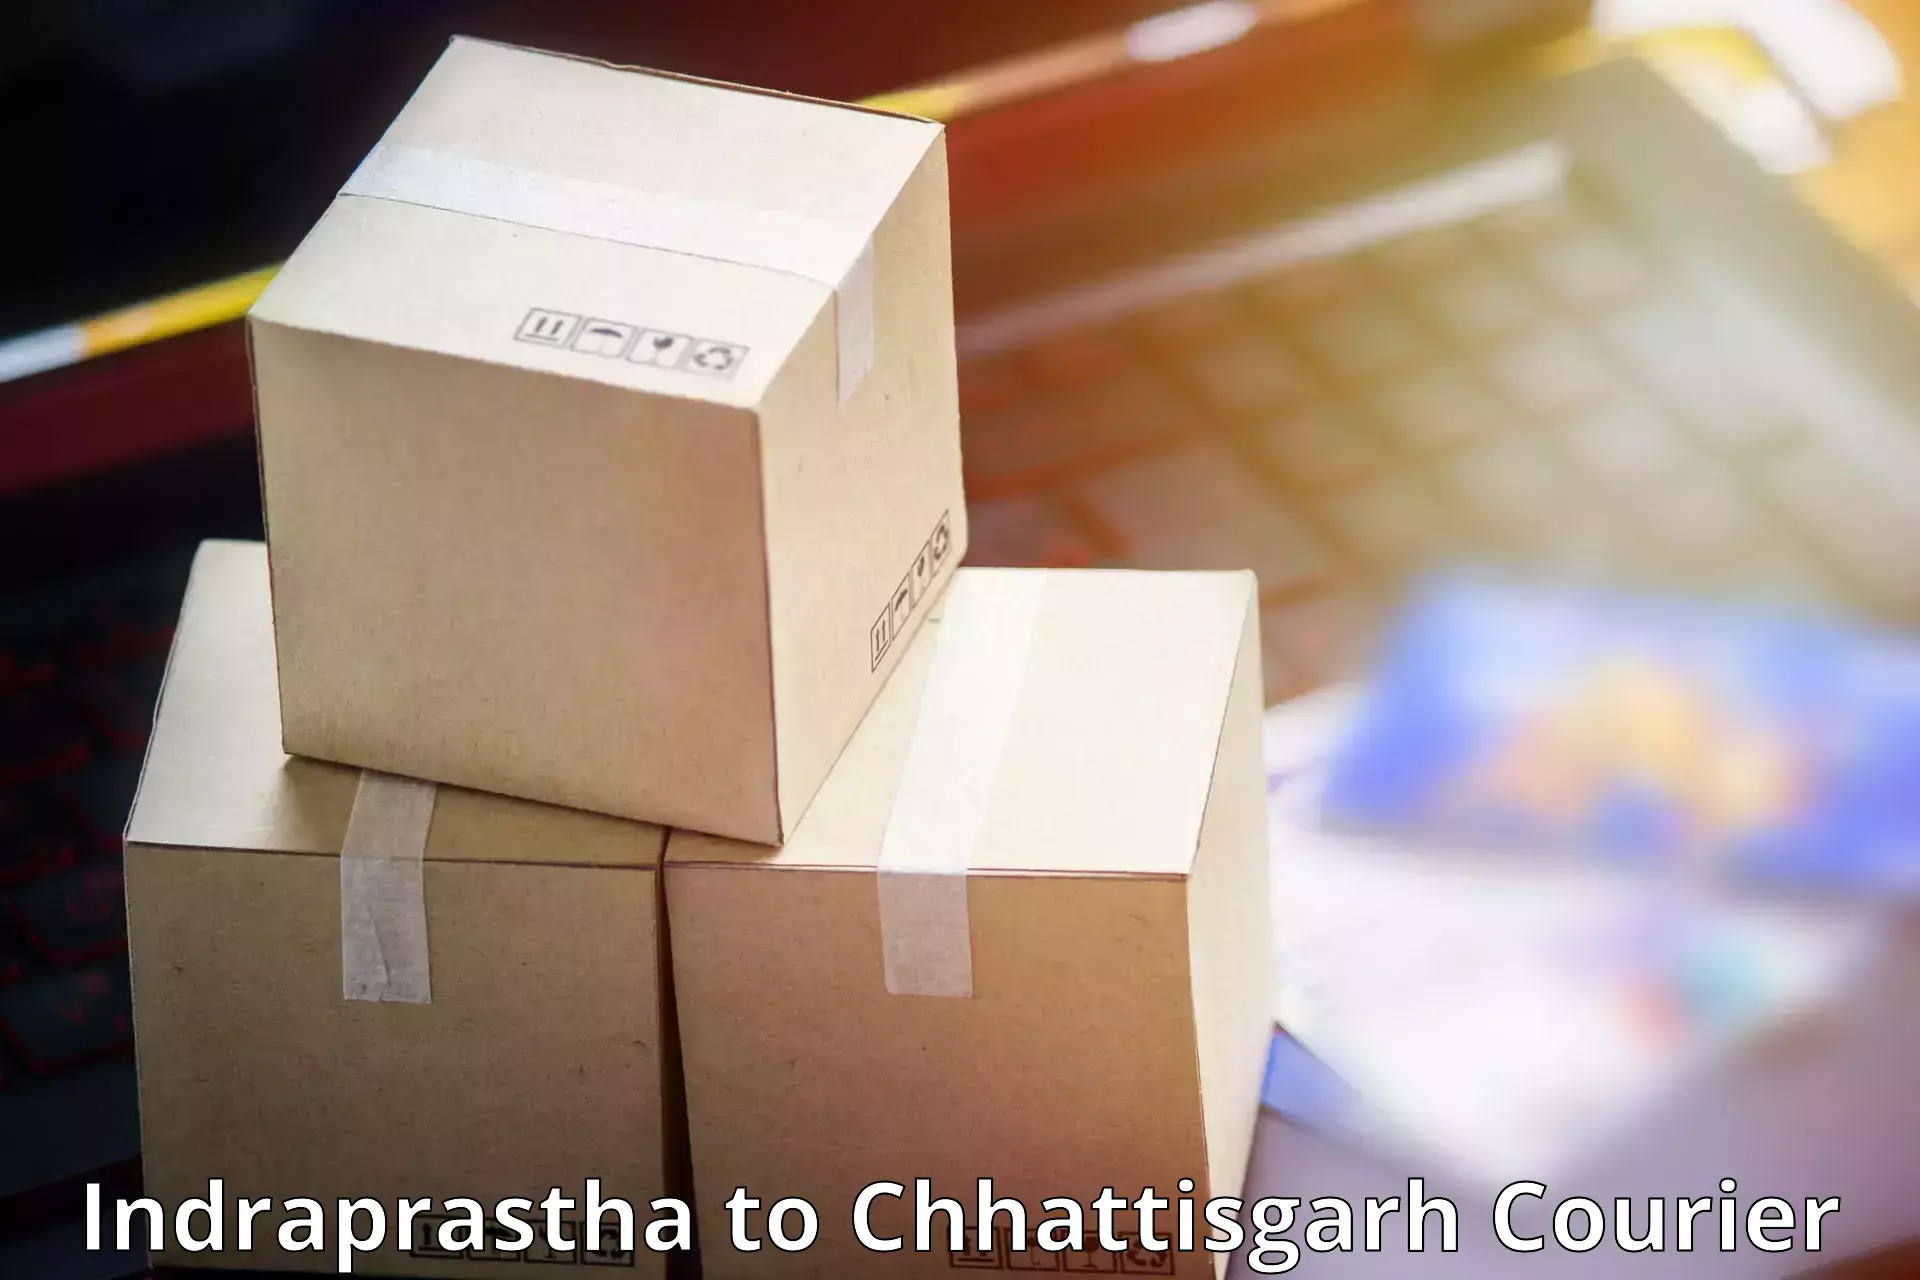 Nationwide delivery network Indraprastha to Pithora